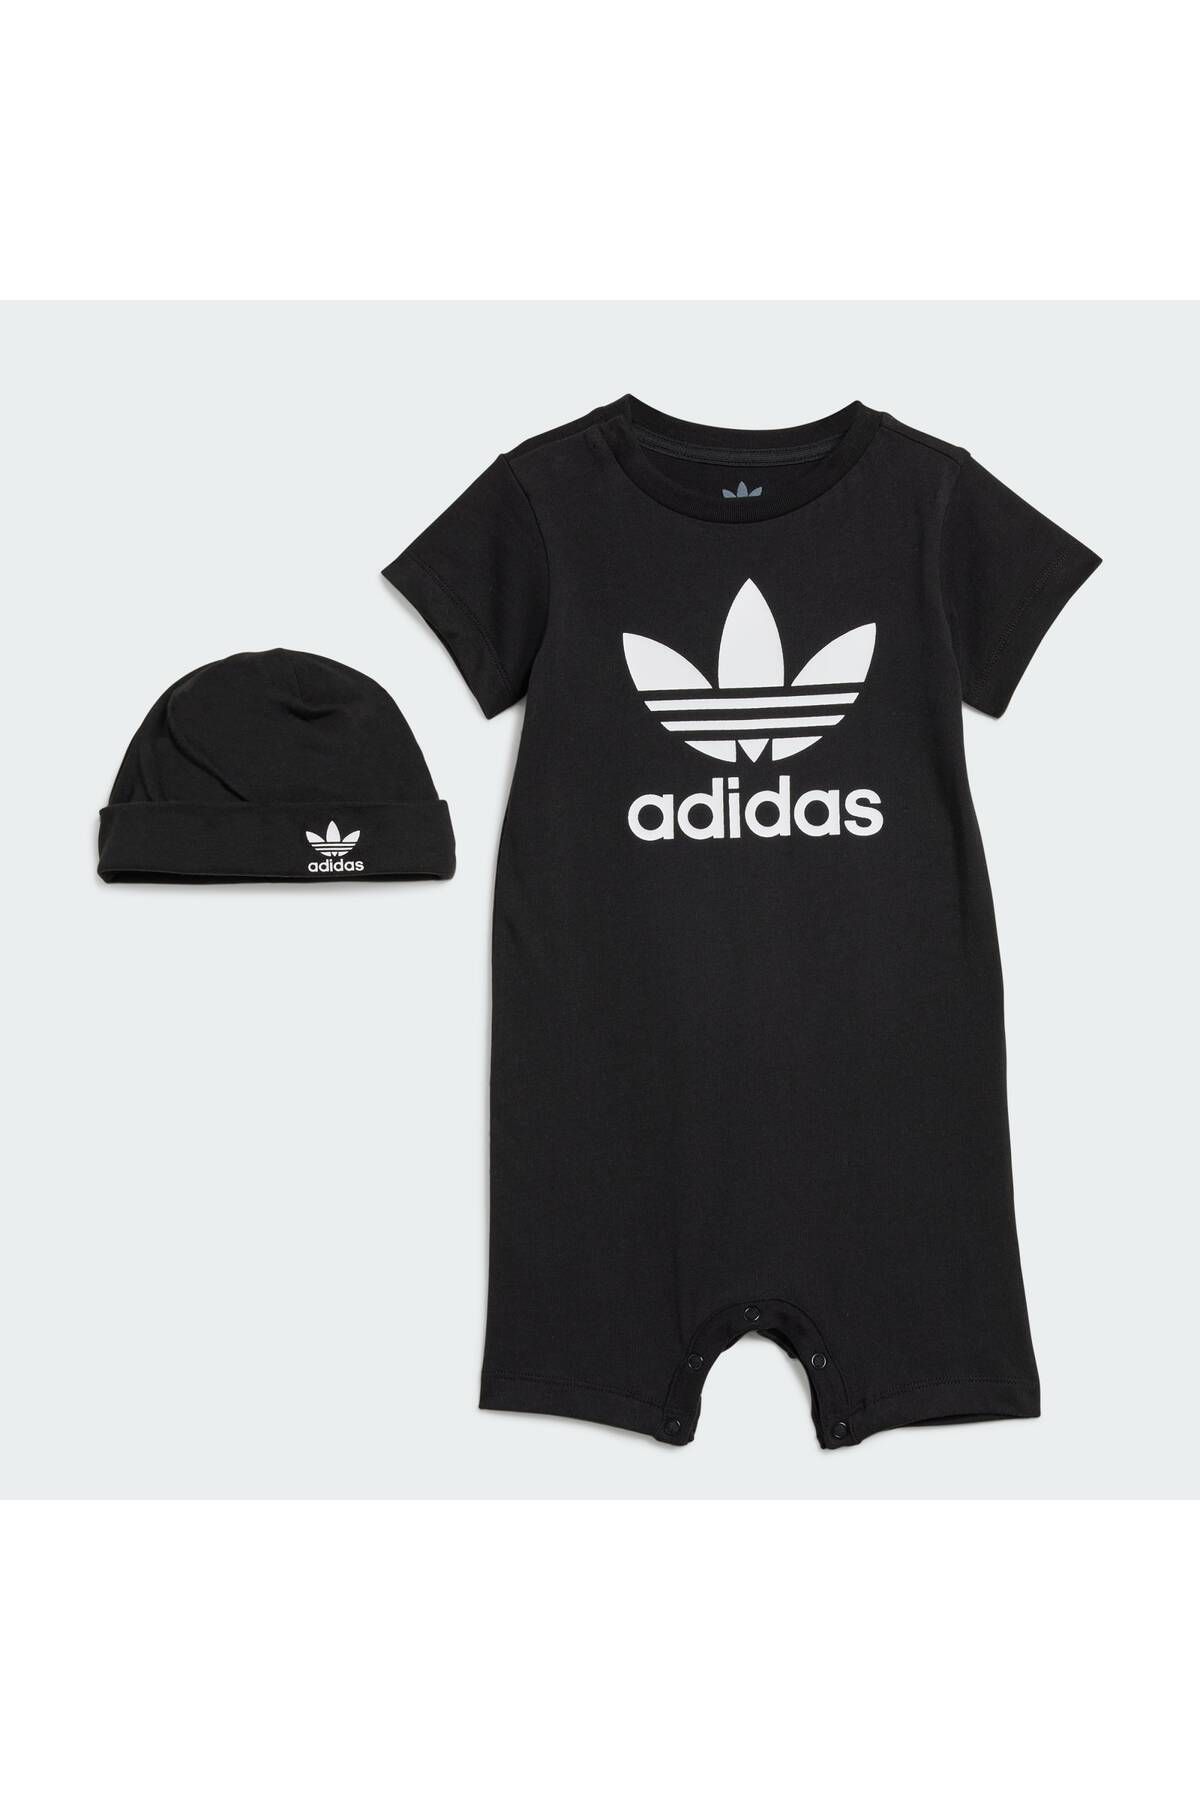 adidas Gift Set Jumpsuit and Beanie